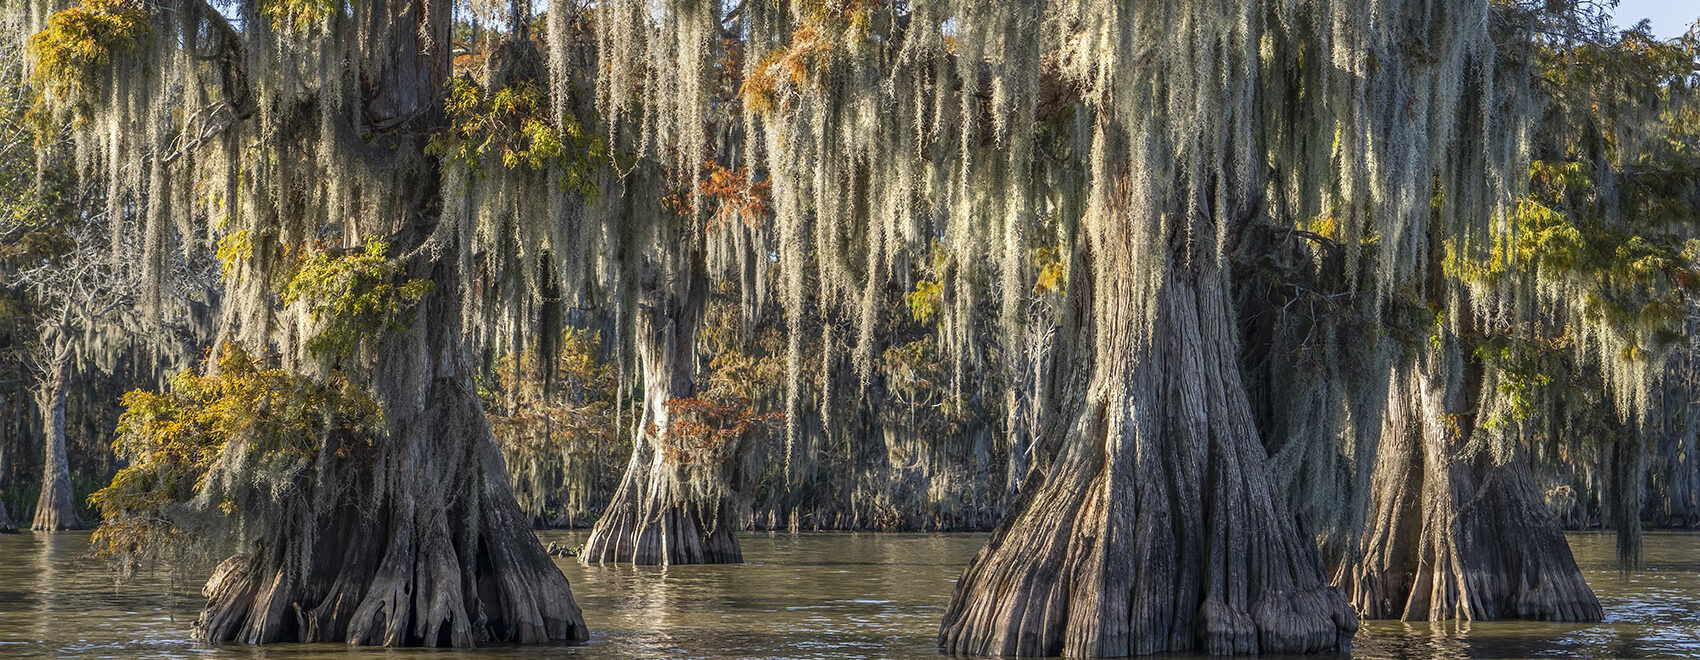 Bald cypress trees with fall color in water